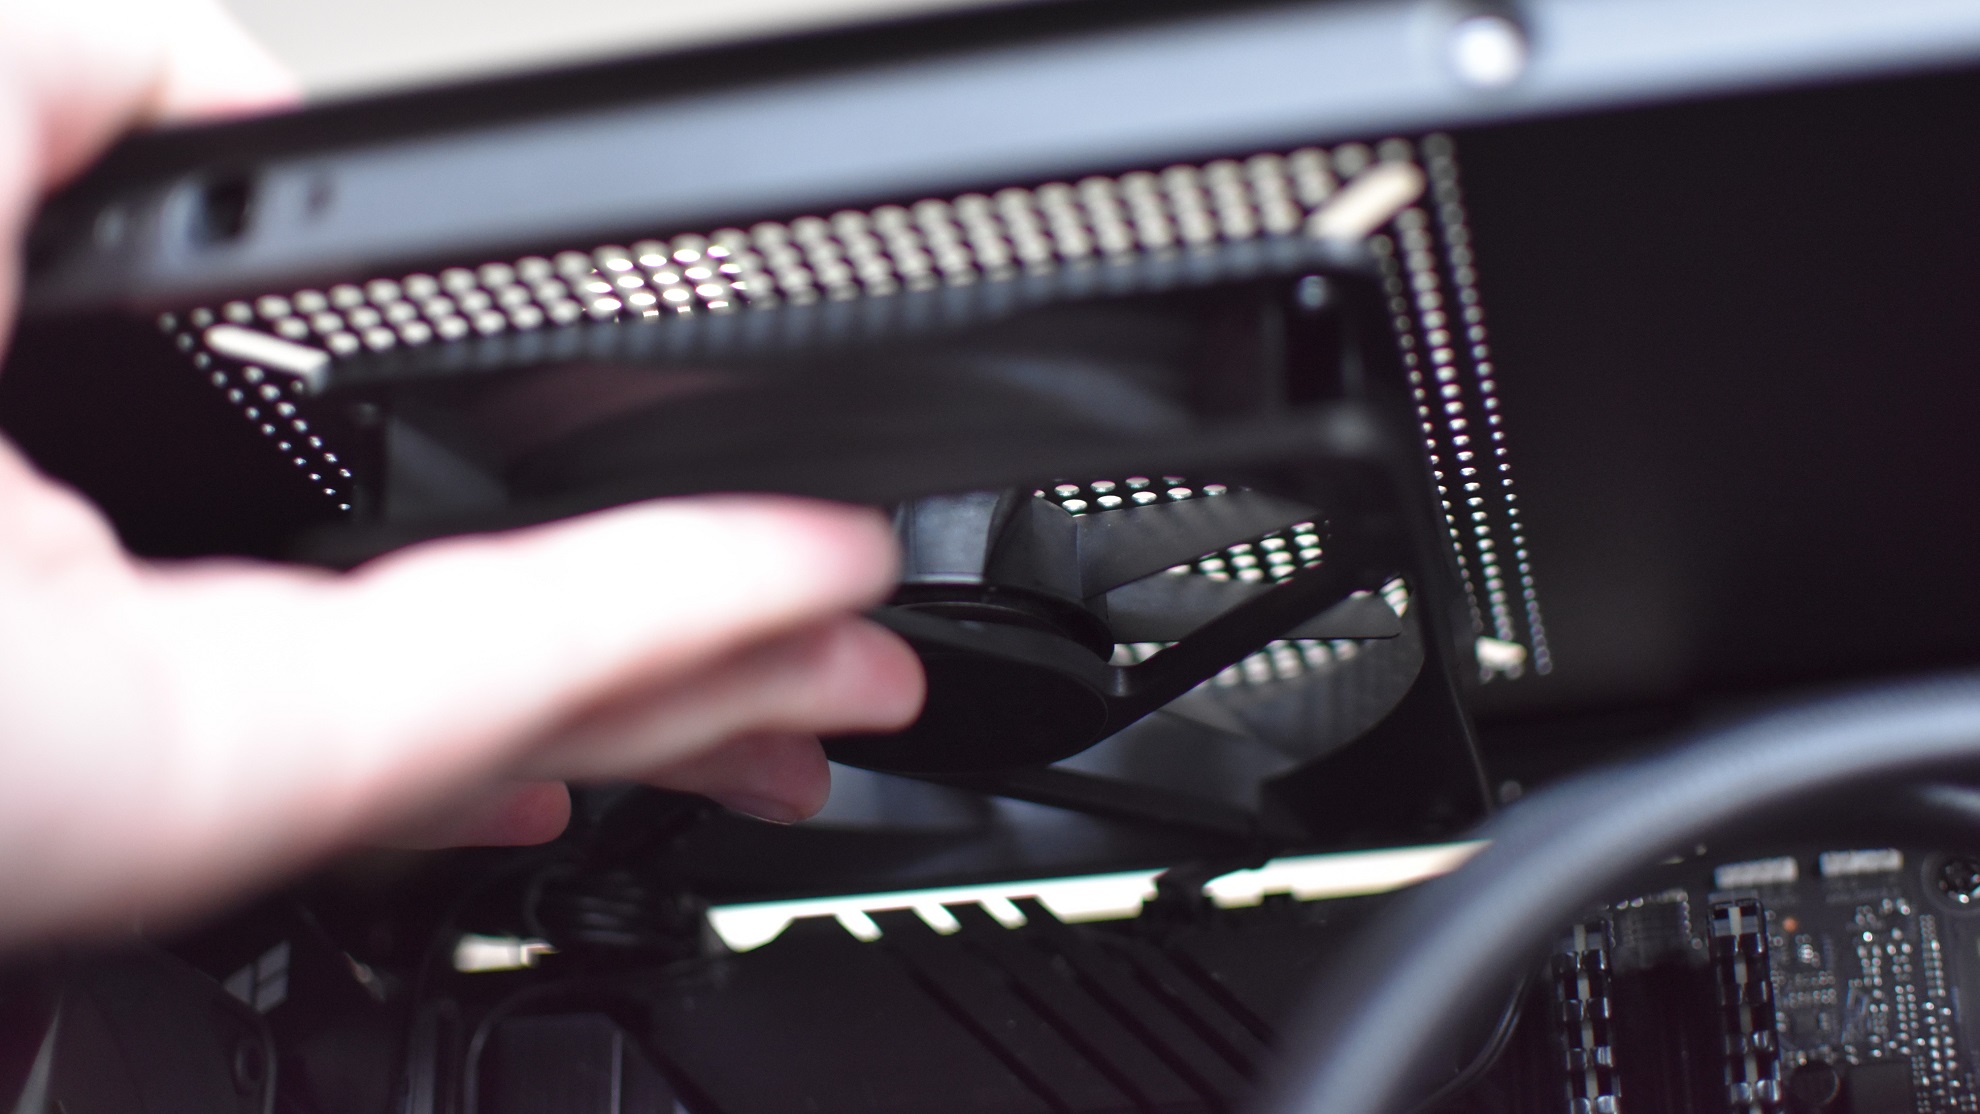 A 120mm case fan being positioned into the top fan slot of a PC case.